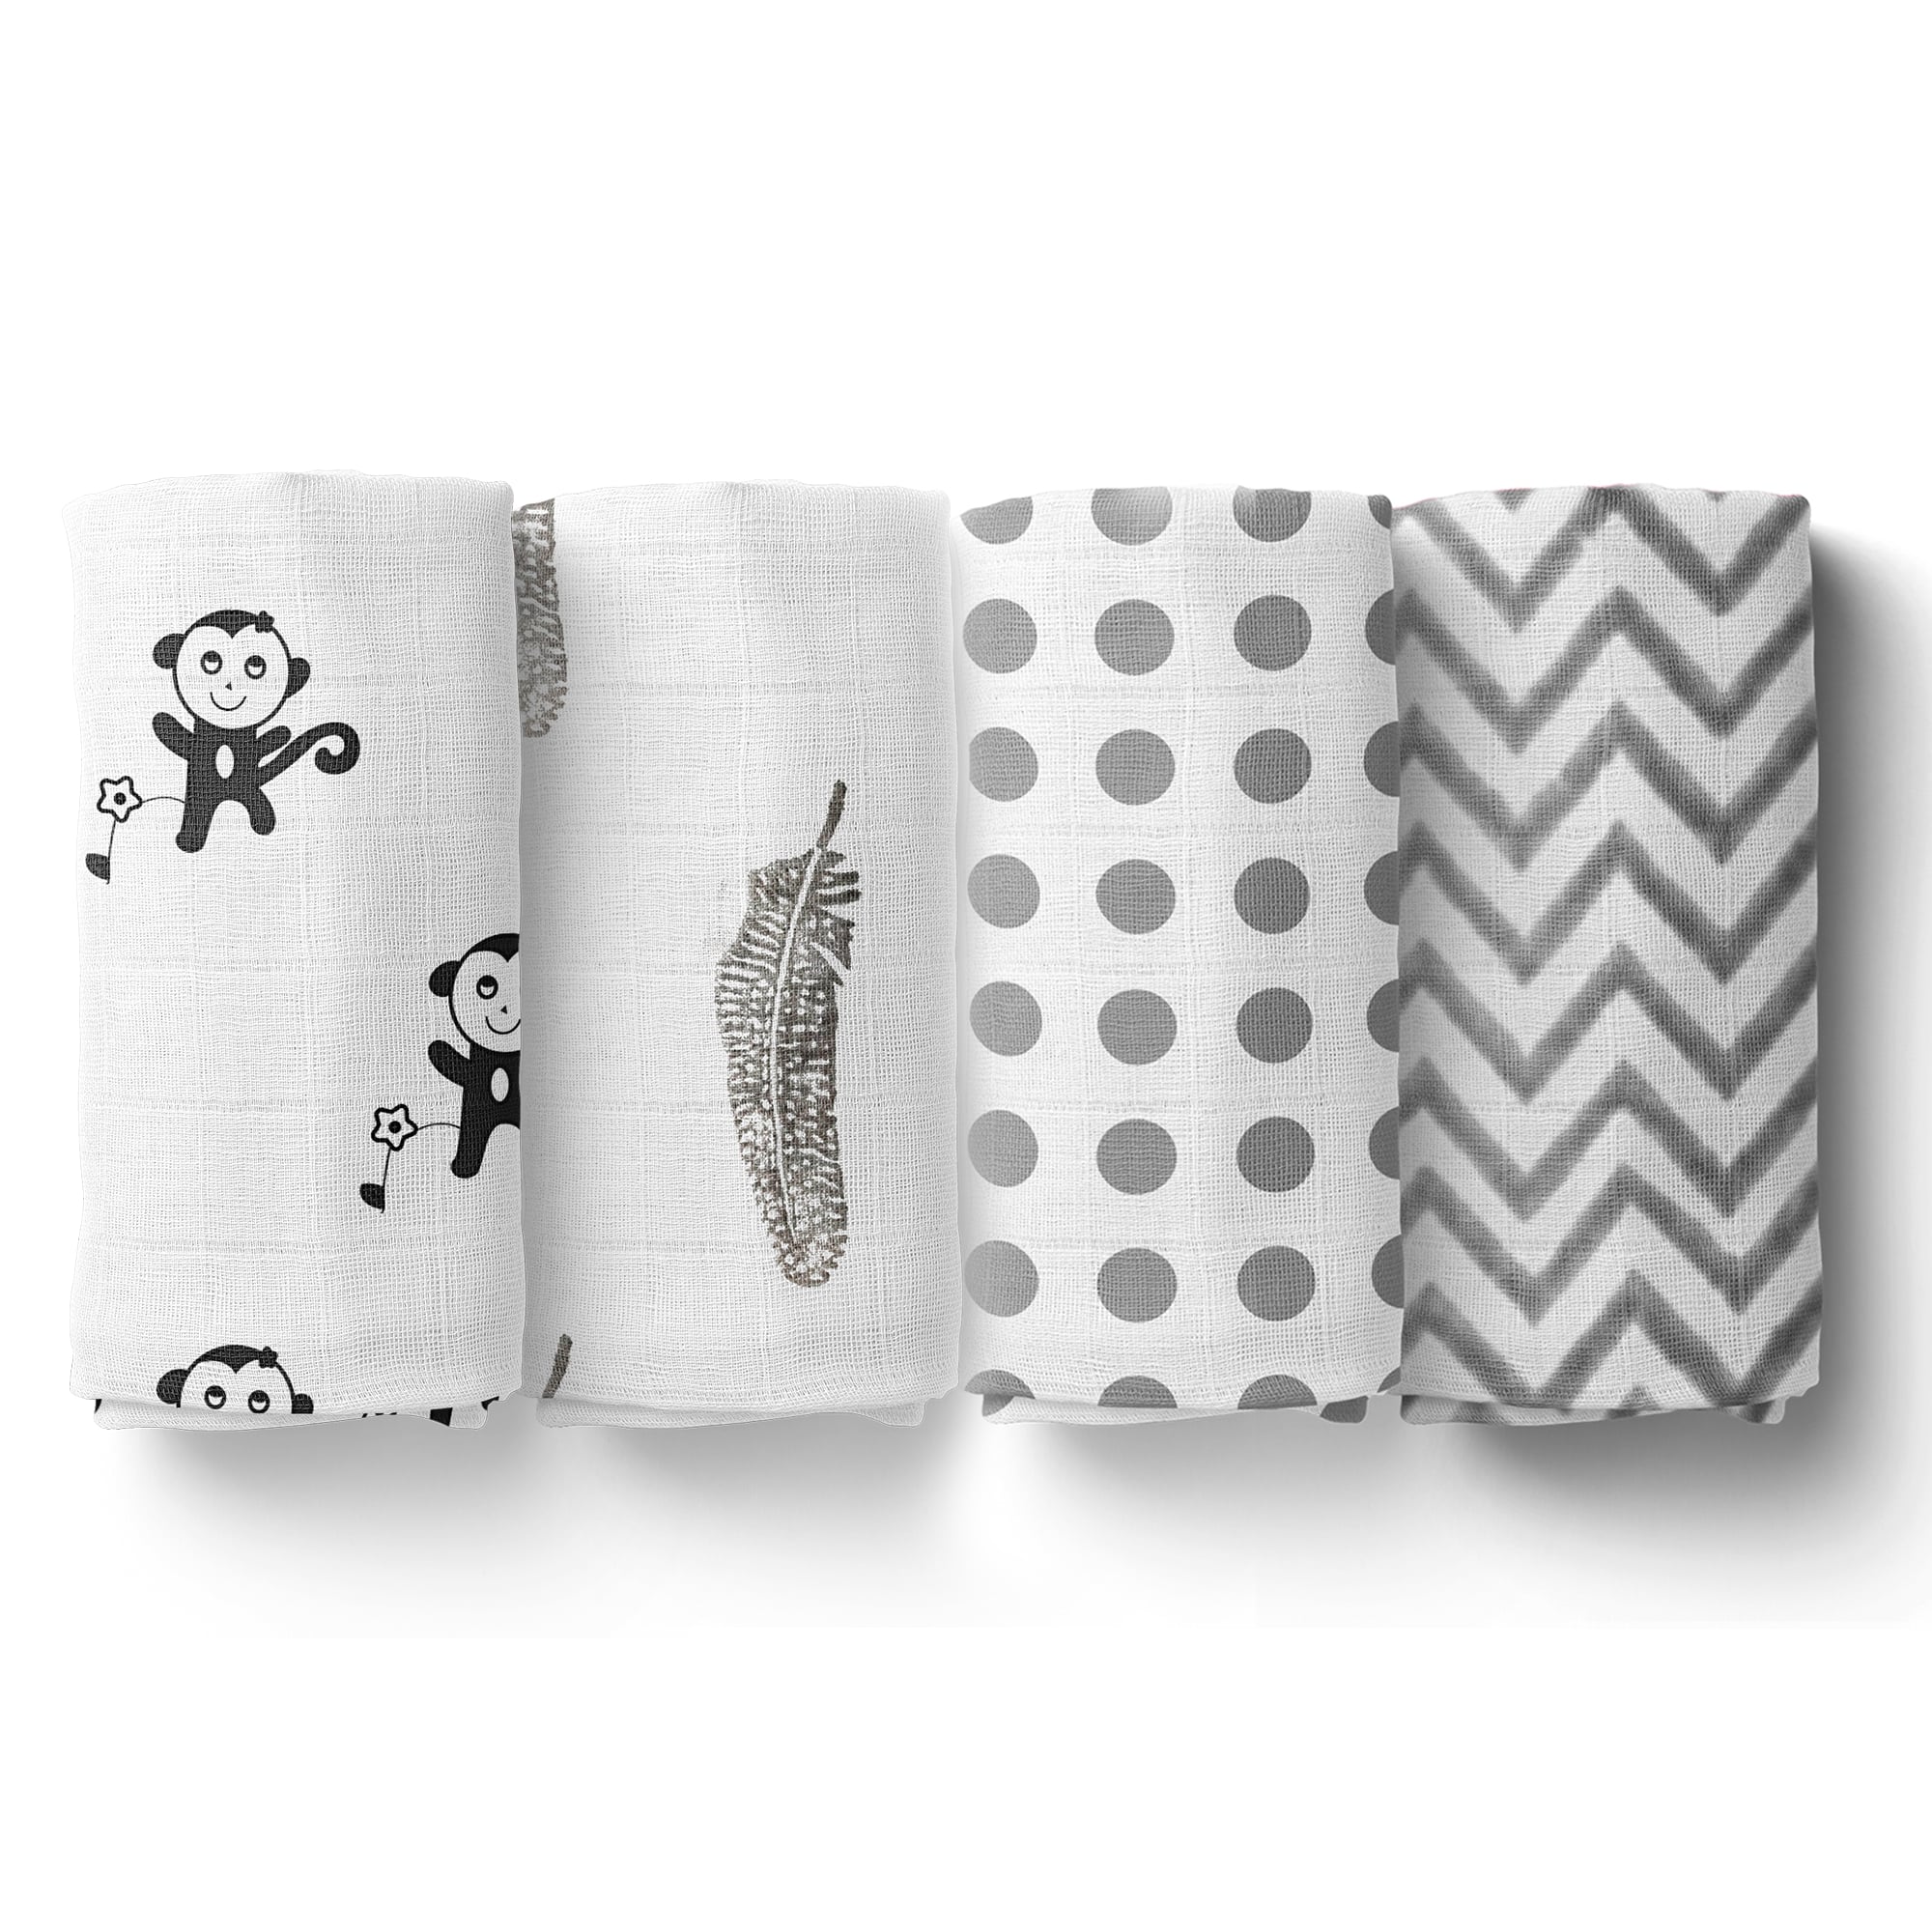 Mom's Home Organic cotton Muslin Swaddle -0-12 Months (Pack of 4 Grey)